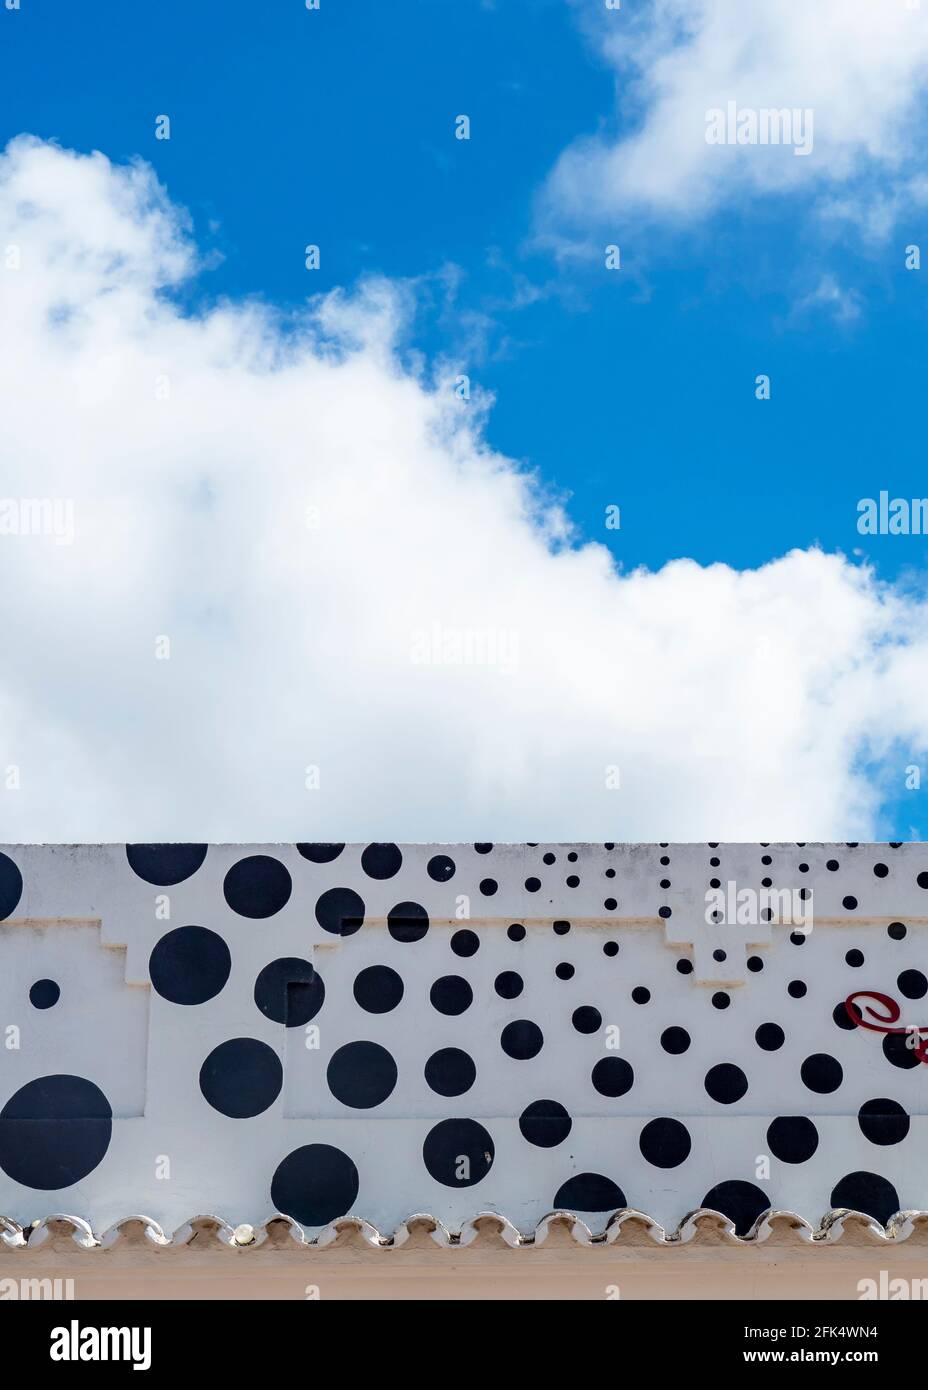 Polka-dotted facade with blue sky and clouds Stock Photo